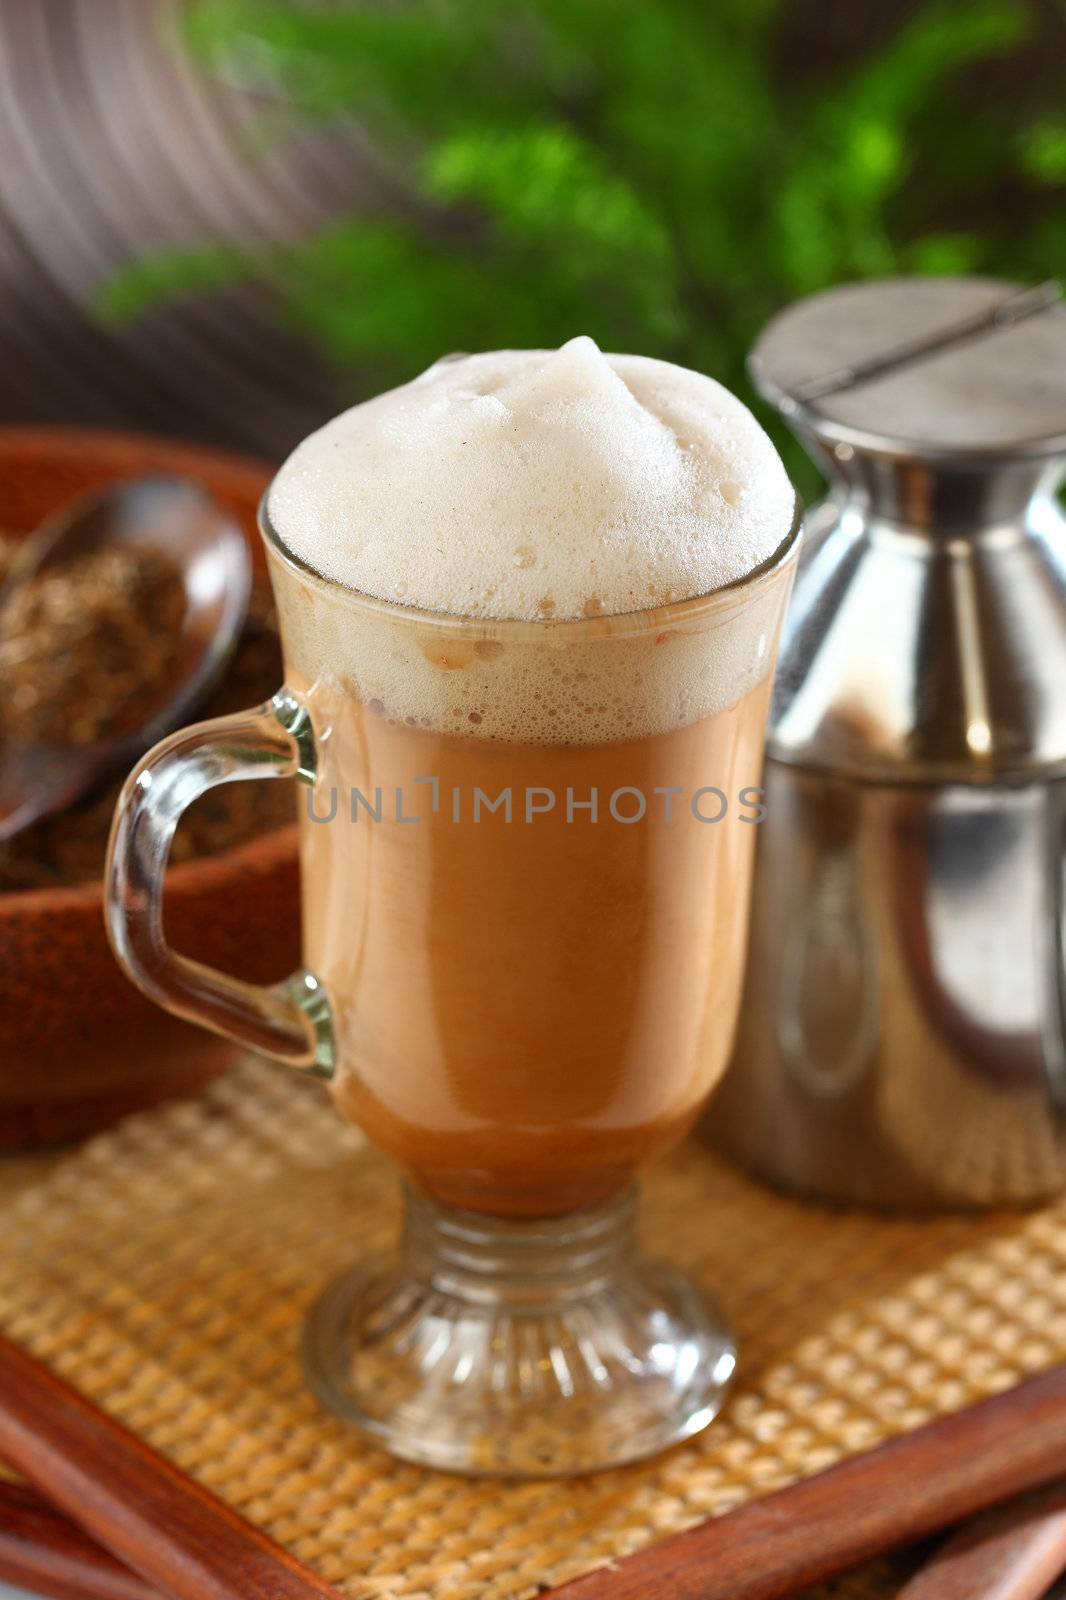 Malaysian famous teh tarik, "pulled tea", flavored hot tea beverage. Its name is derived from the pouring process of "pulling" the drink during preparation